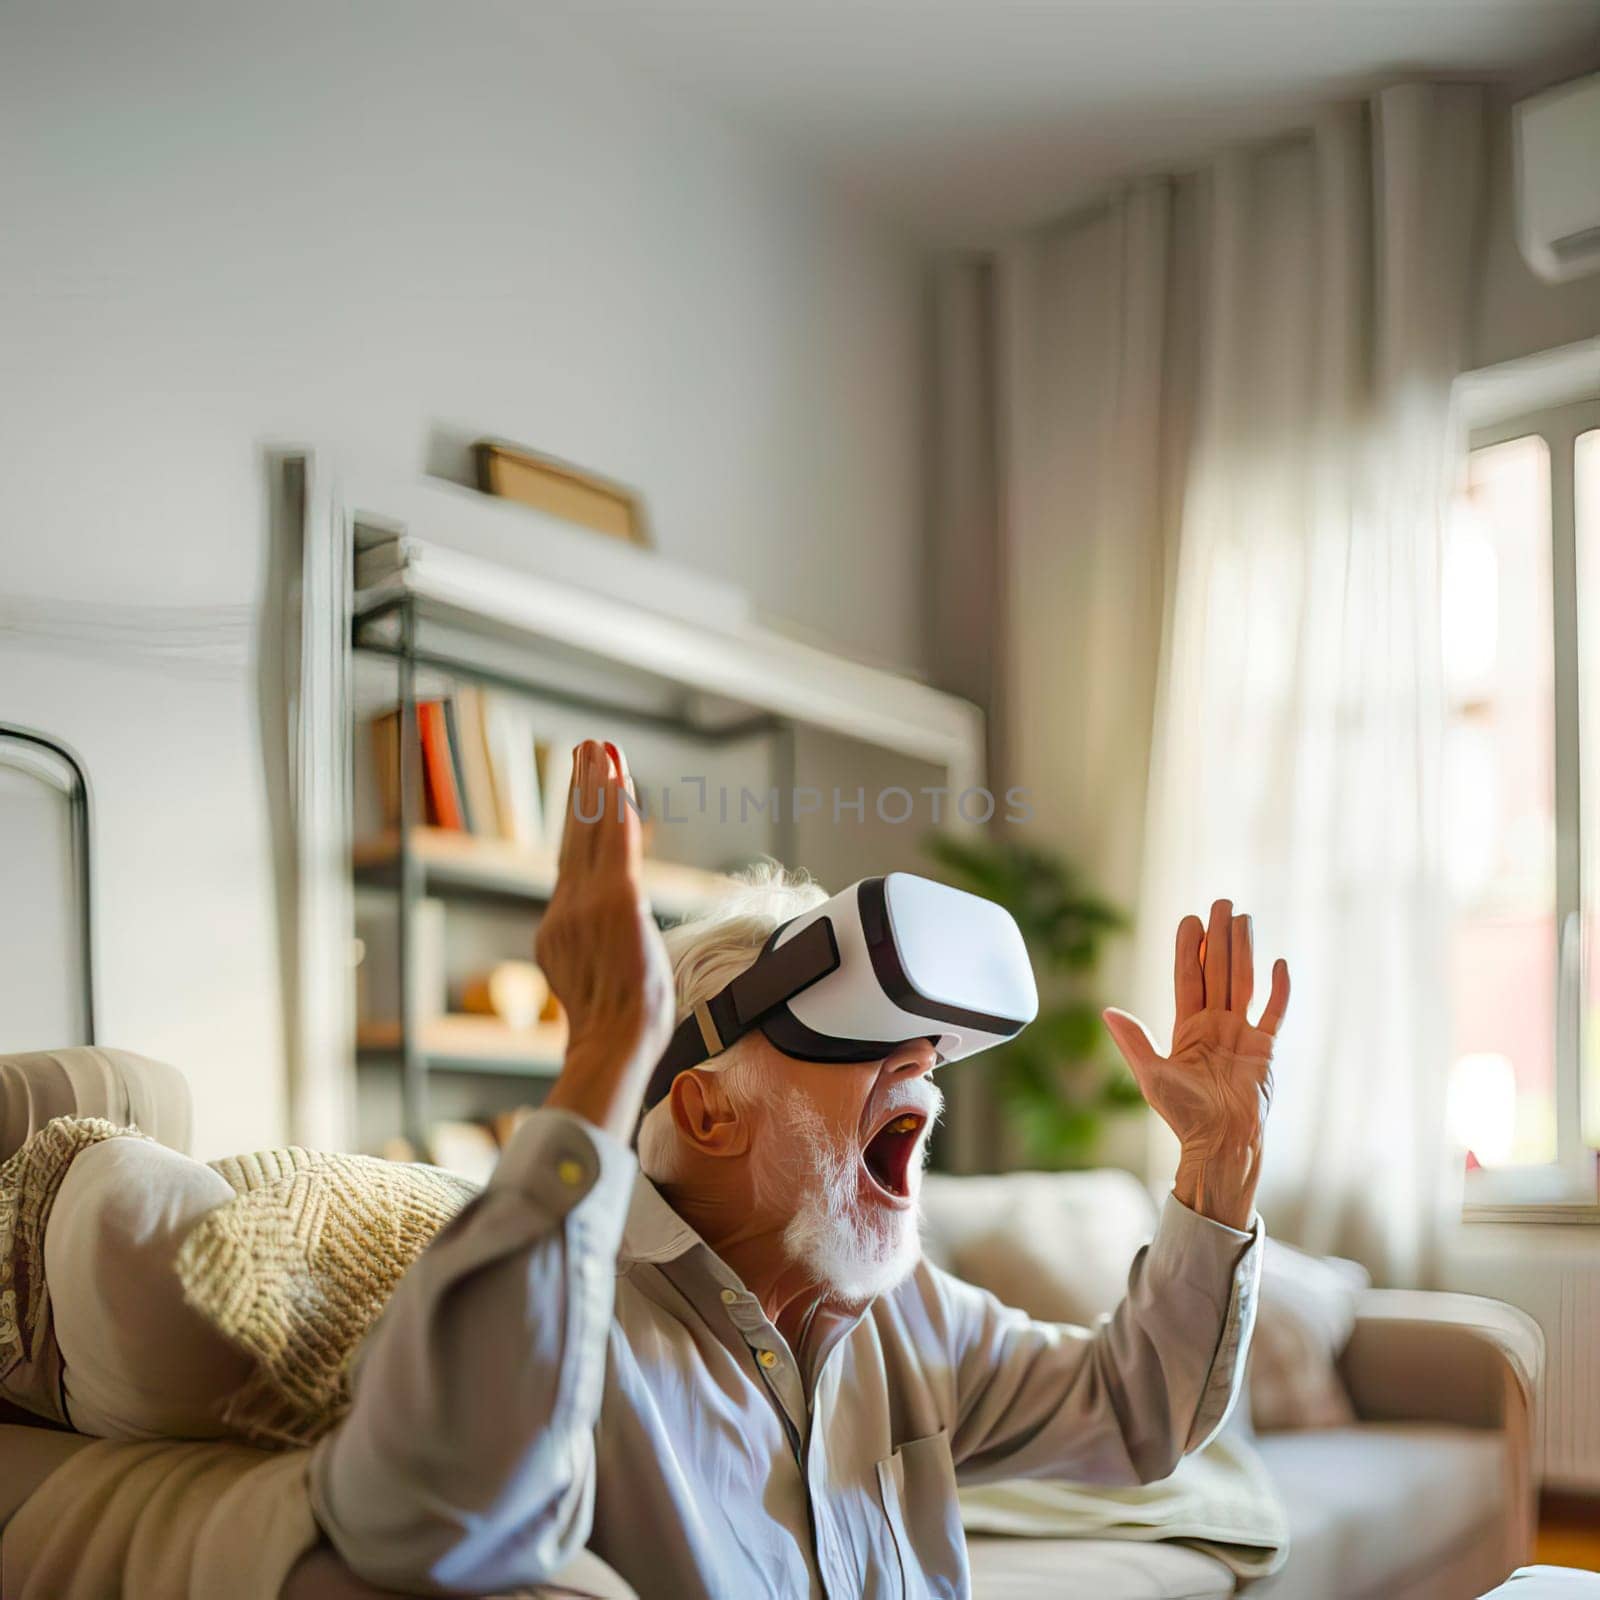 An older man is engaged in virtual reality, yelling while experiencing the digital environment through a headset. by vladimka